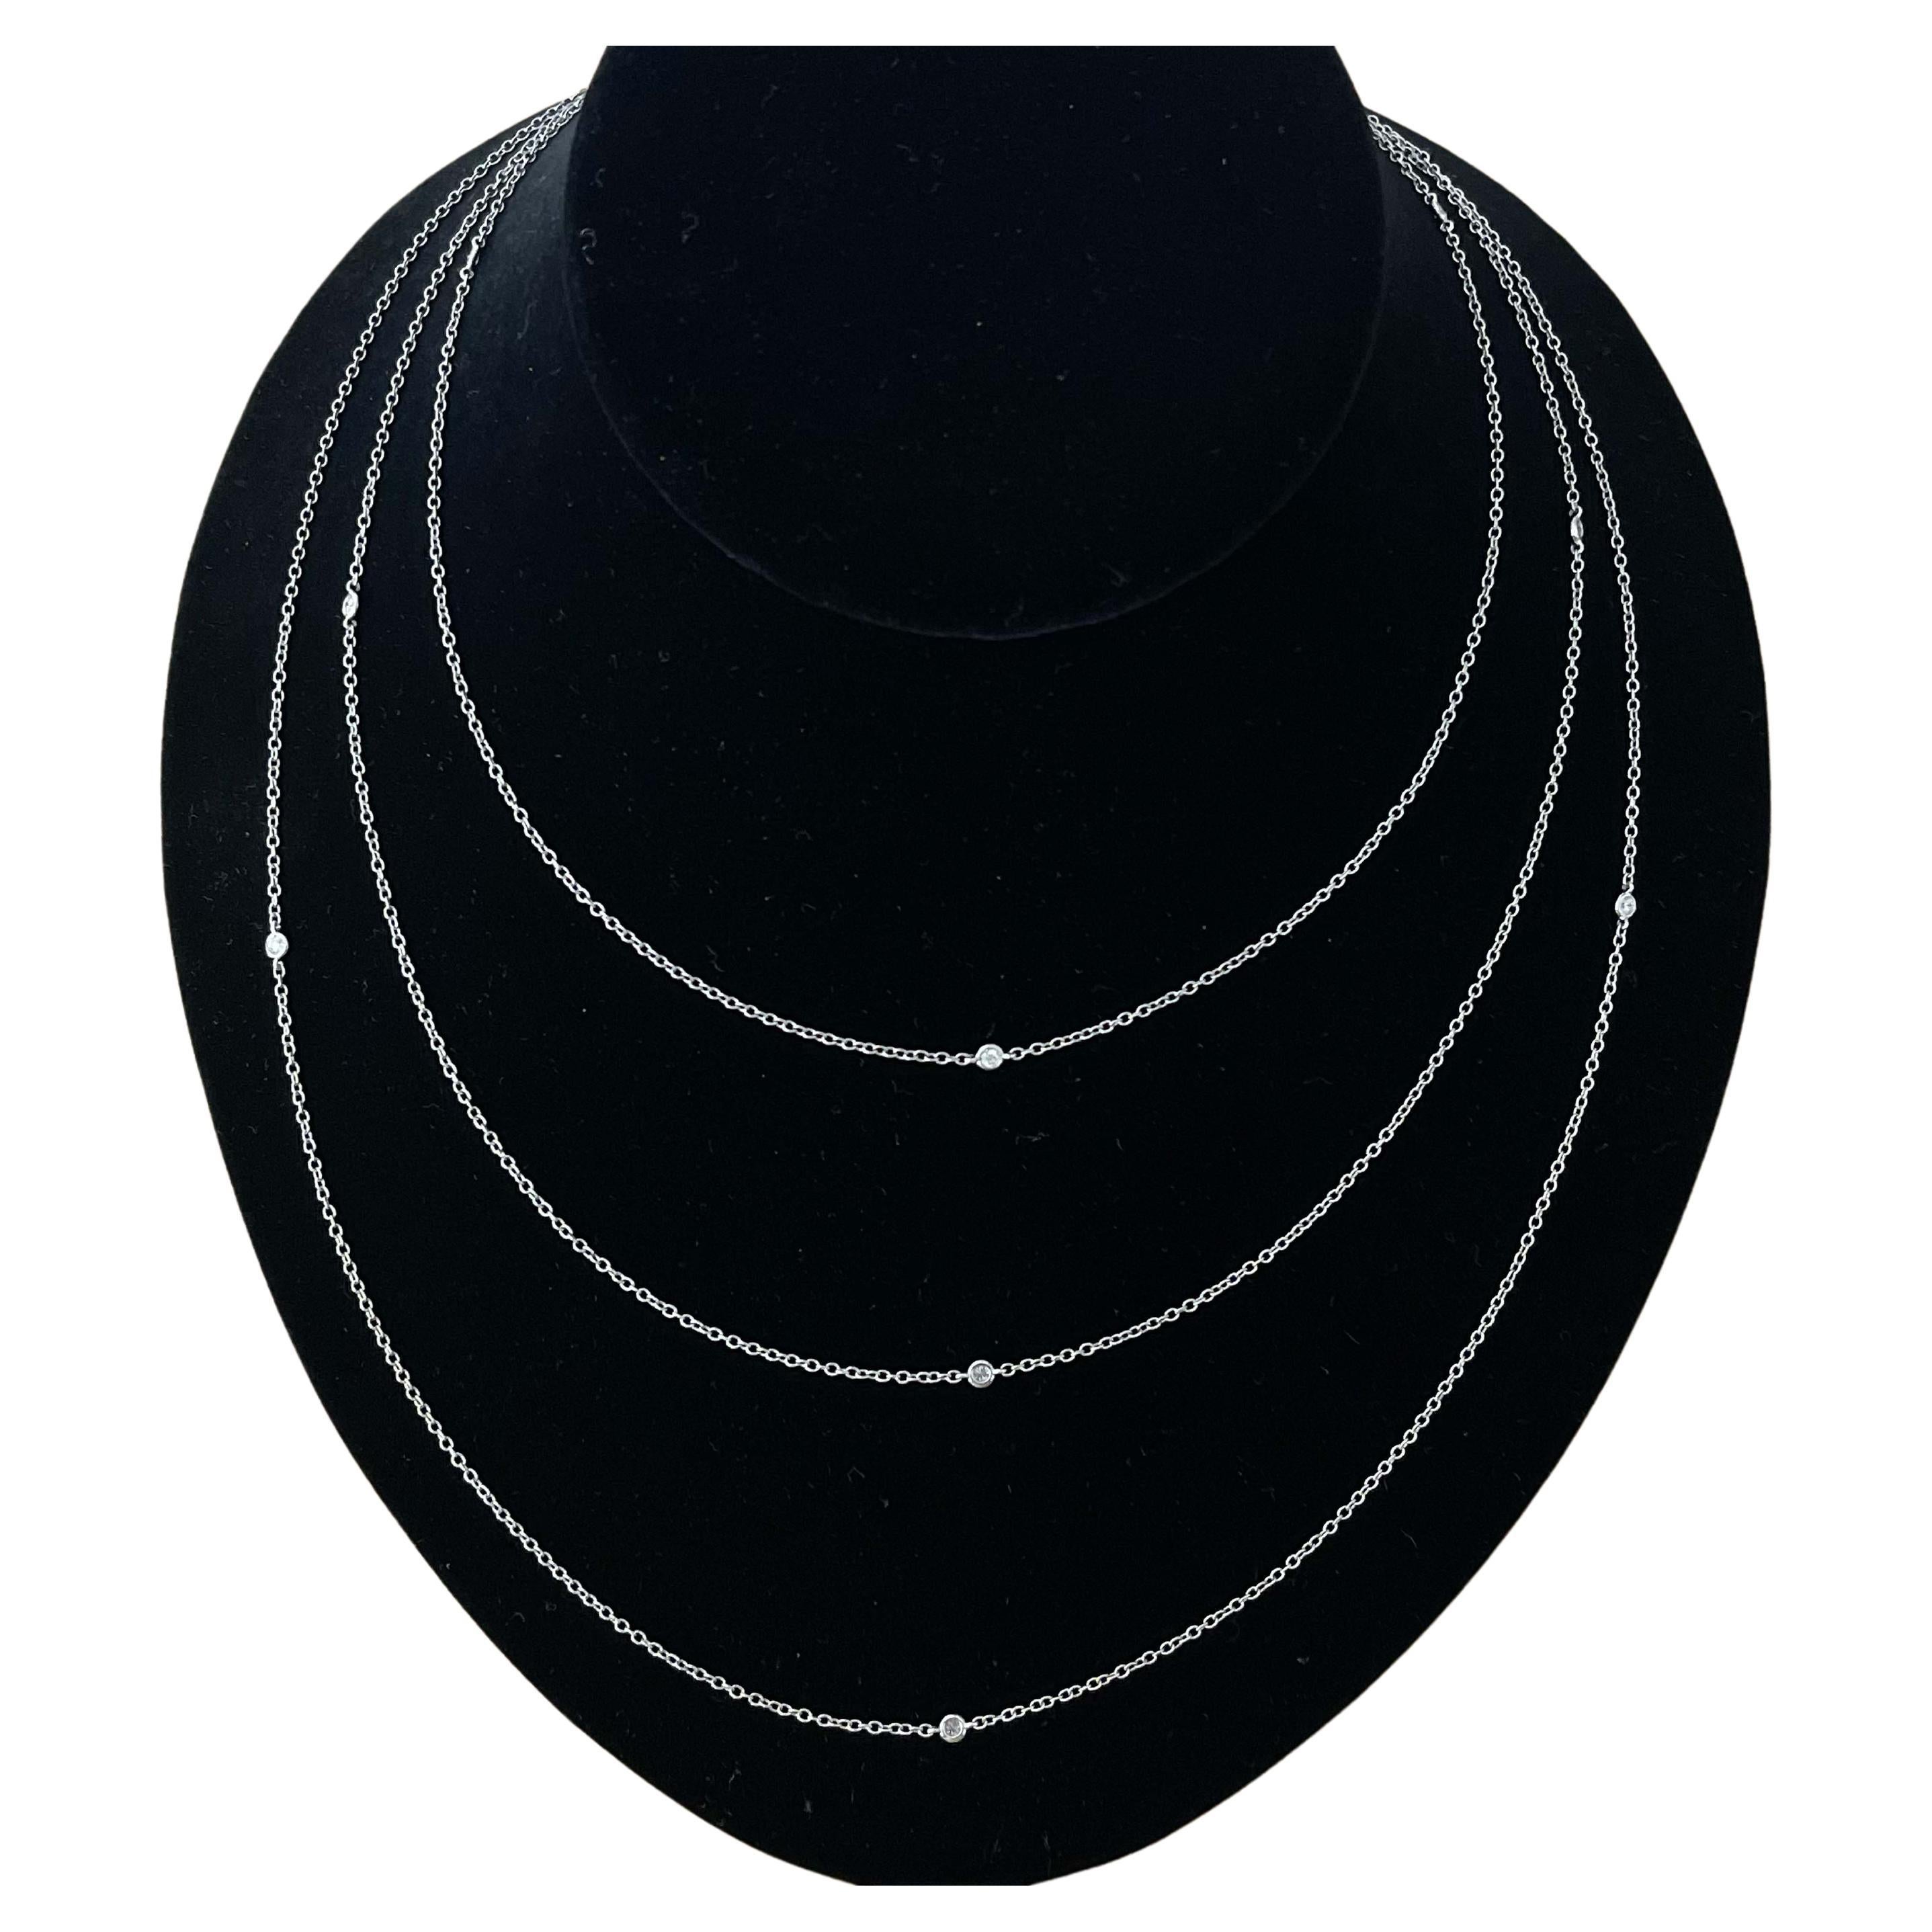 Three Strand Diamonds by the Yard Chain Necklace in 18k White Gold